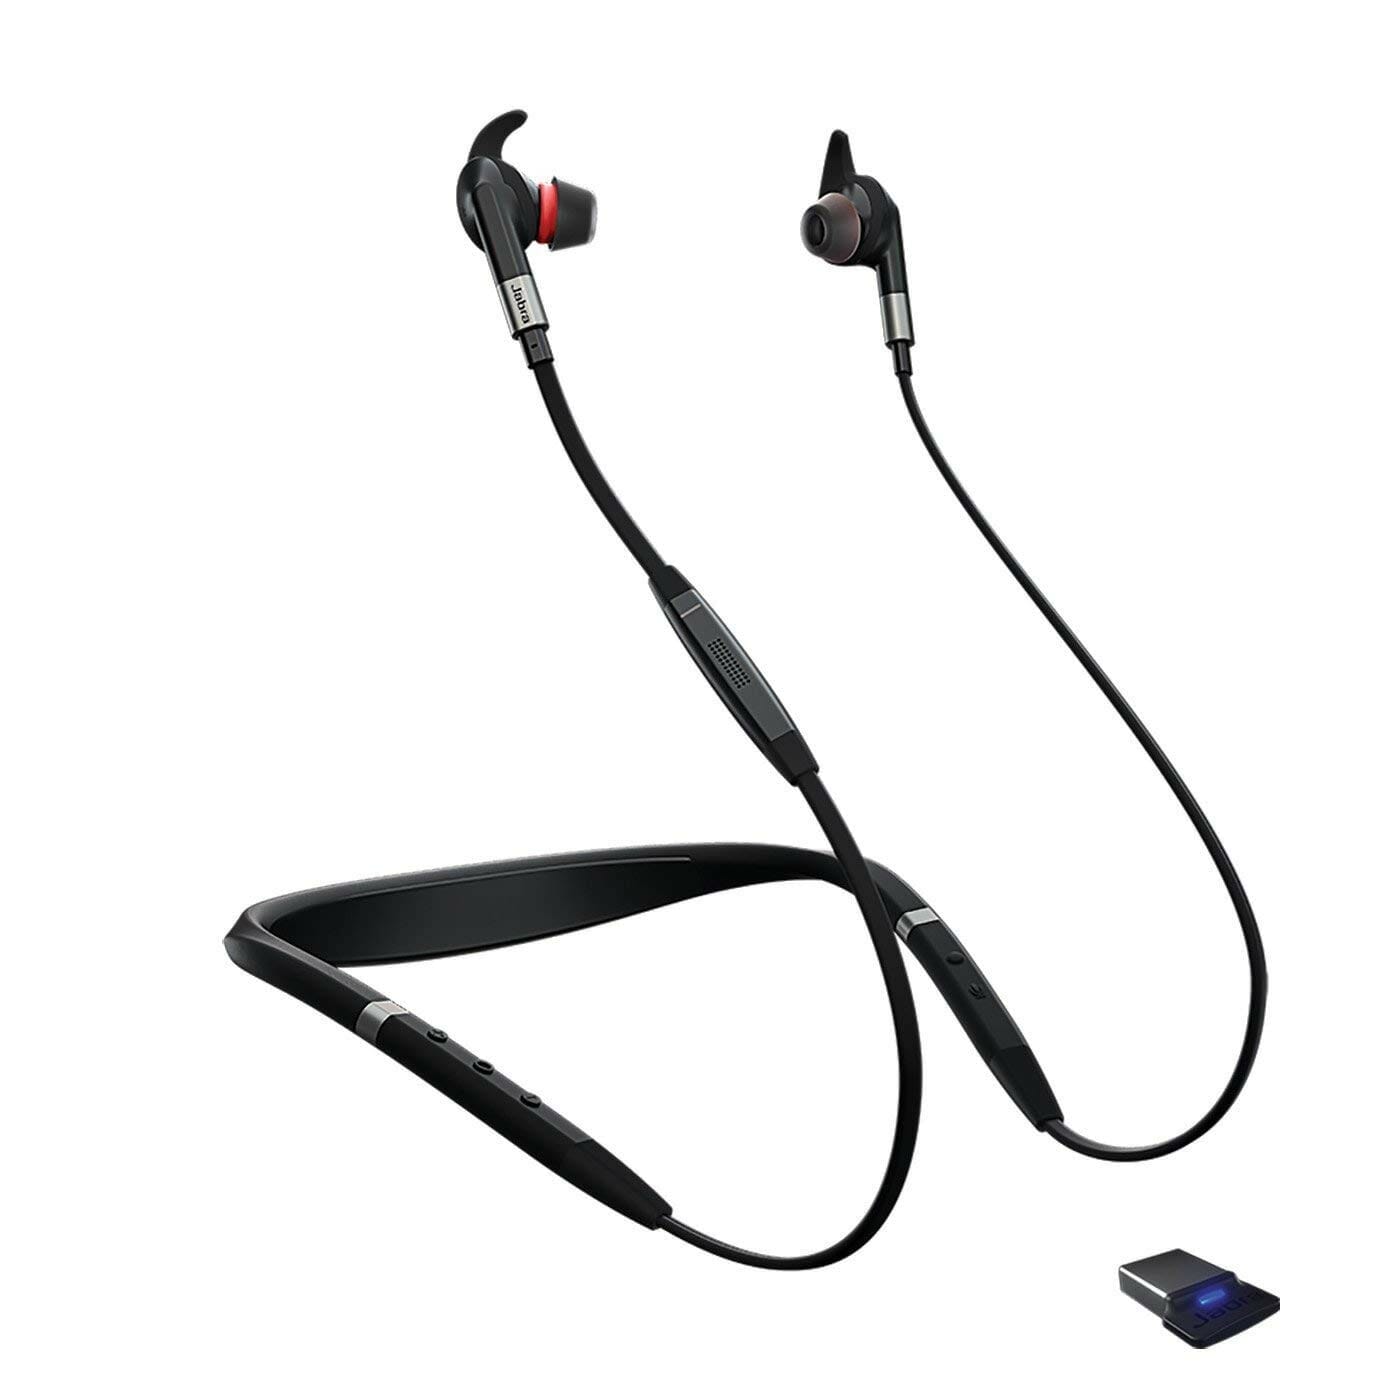 Jabra Elite 85t Review 2022 - Why These Earbuds ROCK